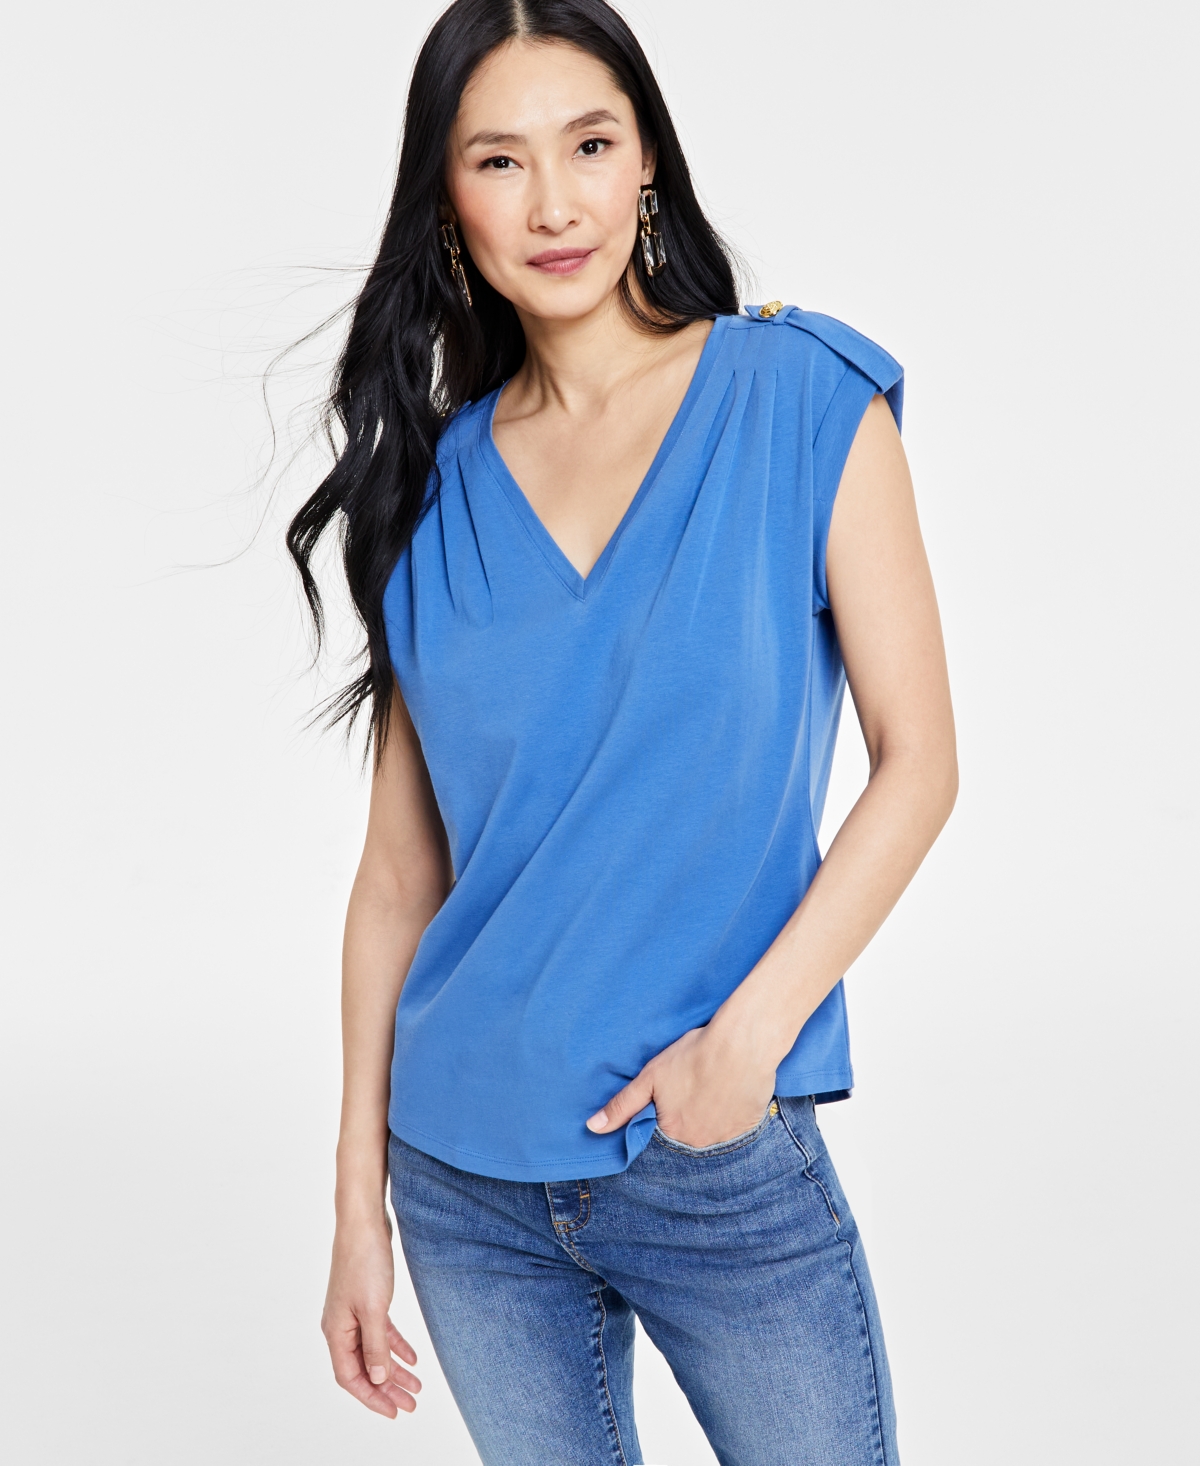 Women's Cap-Sleeve V-Neck Top, Created for Macy's - Pink Dragonfruit